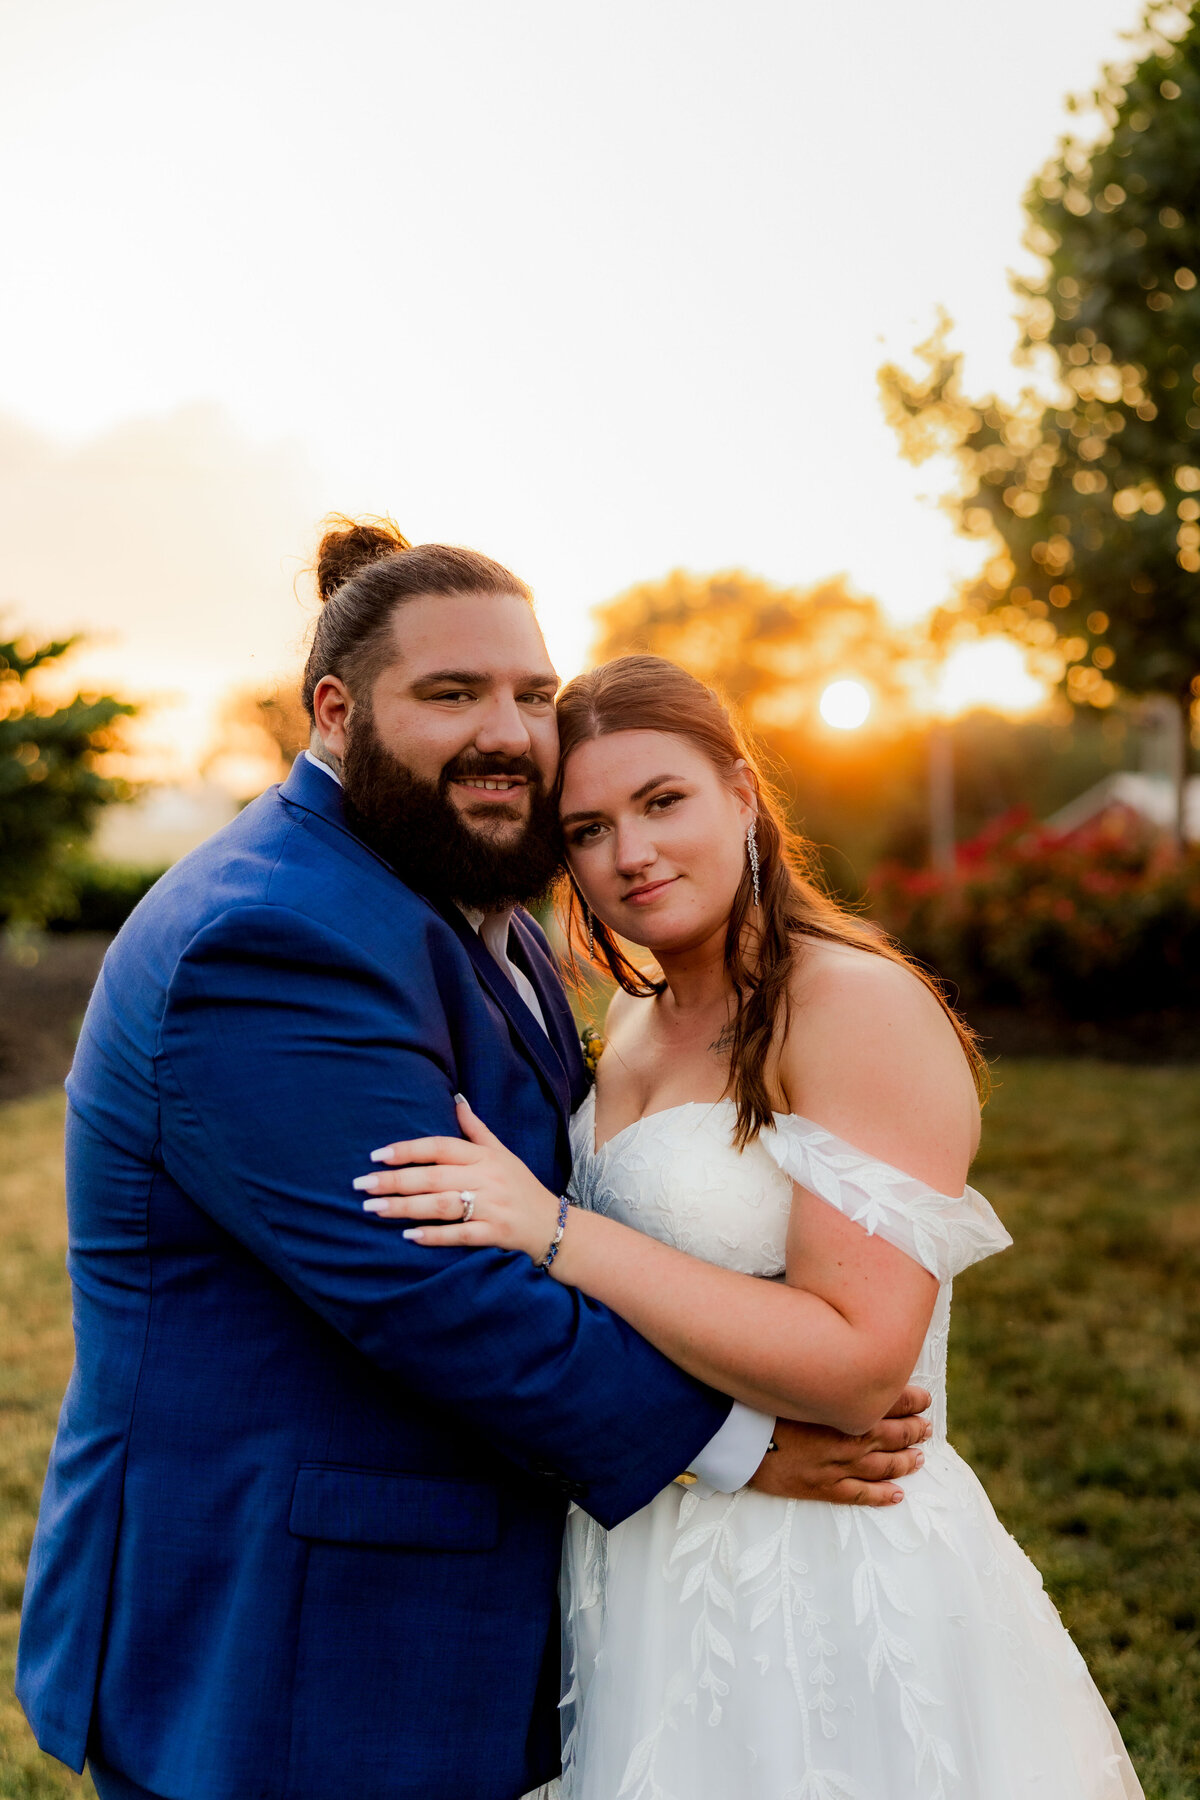 A portrait of a couple on their wedding day in sunset.